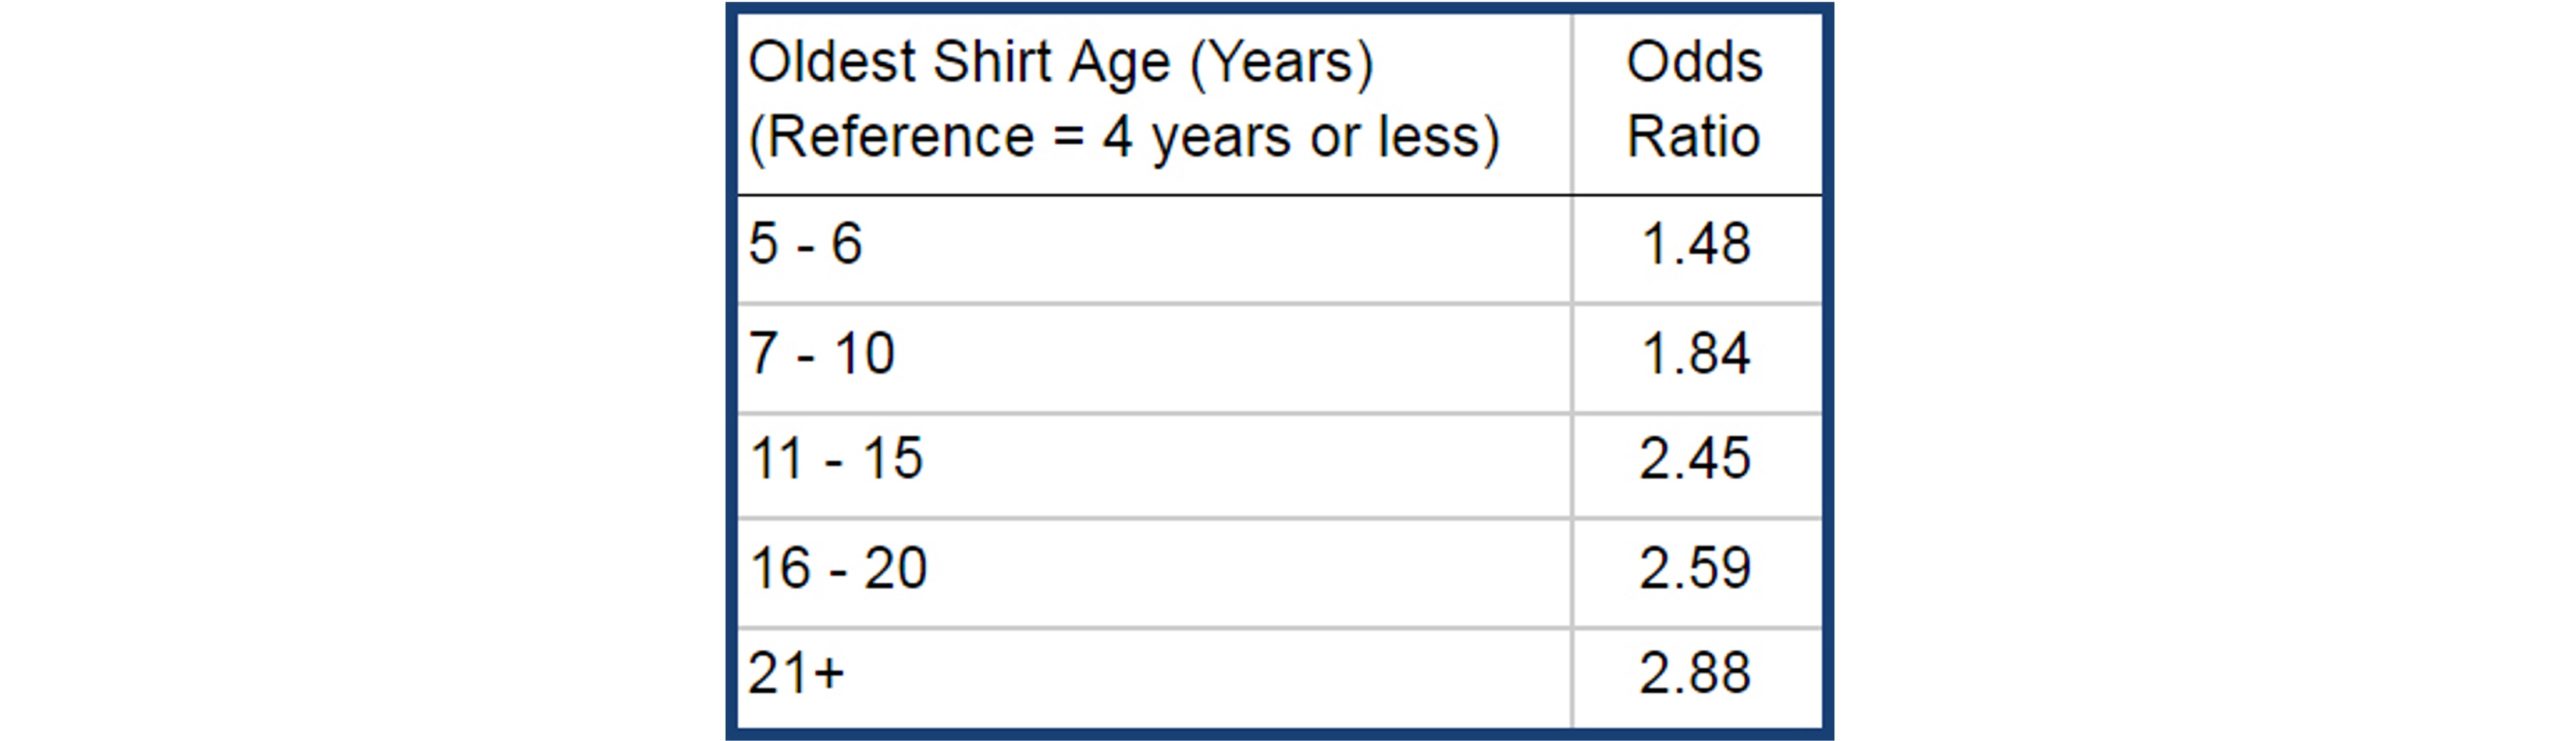 oldest shirt dads own survey results chart